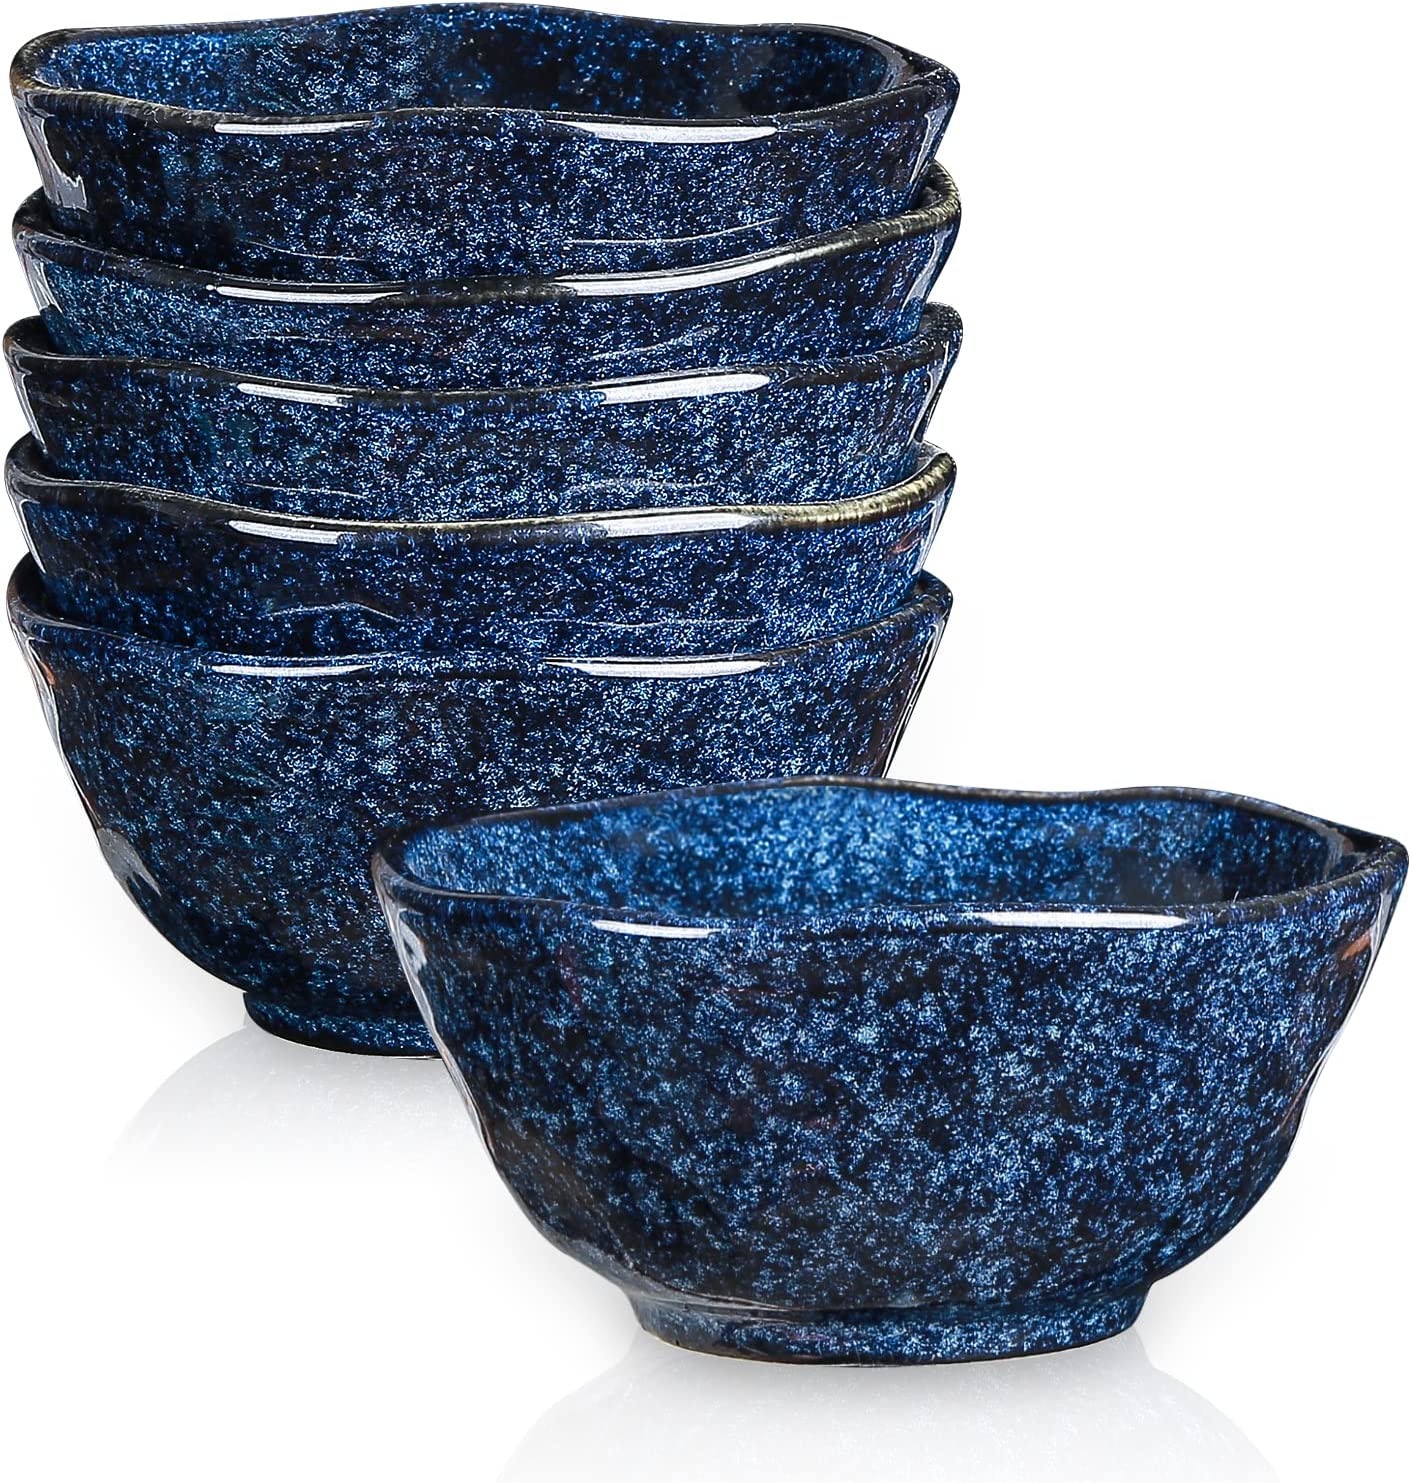 Vicrays Ceramic Small Dessert Bowls Set 10 oz, Set of 6, Microwave, Oven  and Dishwasher Safe, for Rice, Ice Cream, Soup, Snacks, Cereal, Chili, Side  Dishes etc, Kitchen Bowls Set(Starry Blue)